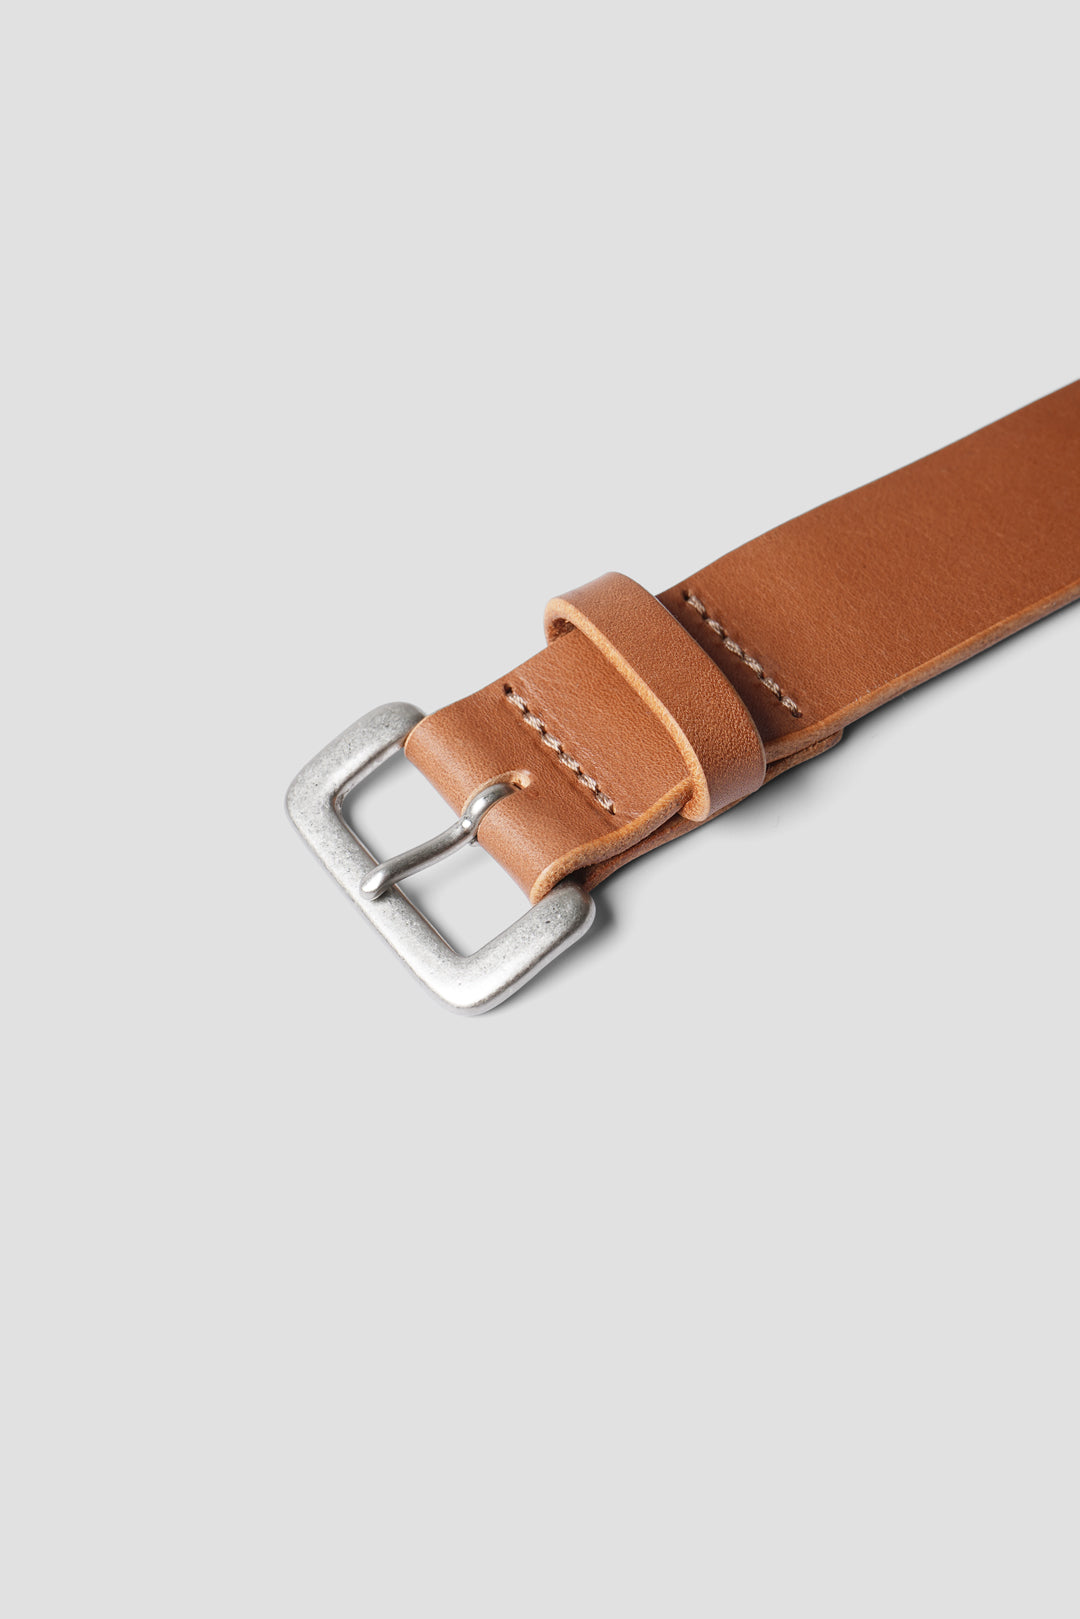 "ONE FITS ALL" TM-BELT-0001  BROWN